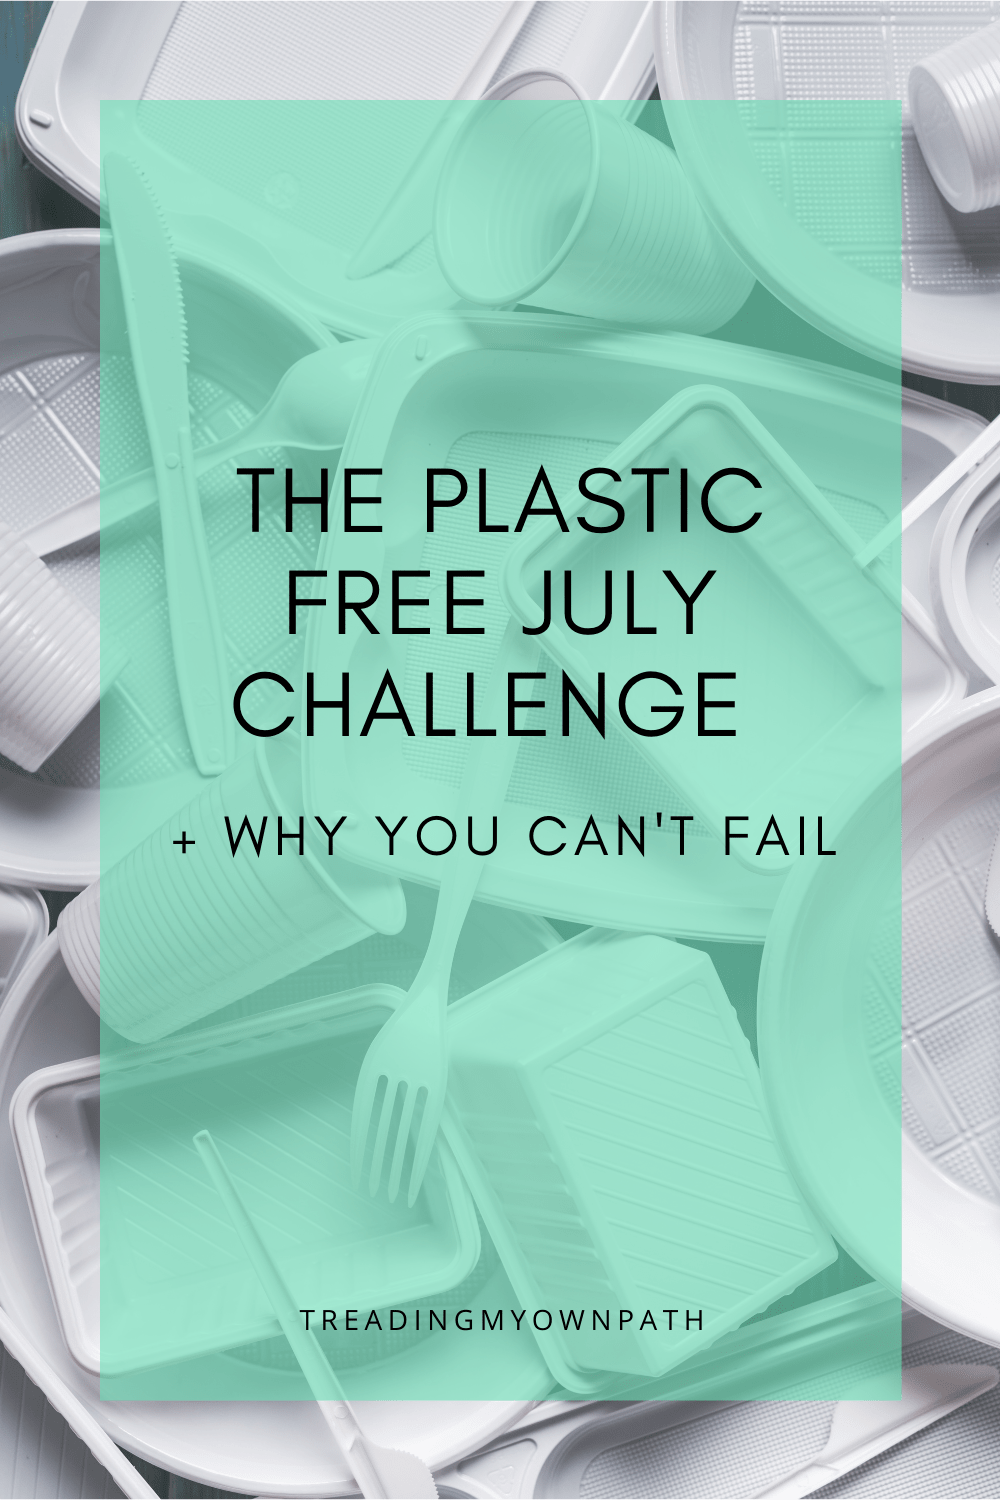 Why You Can\'t Fail at Plastic Free July